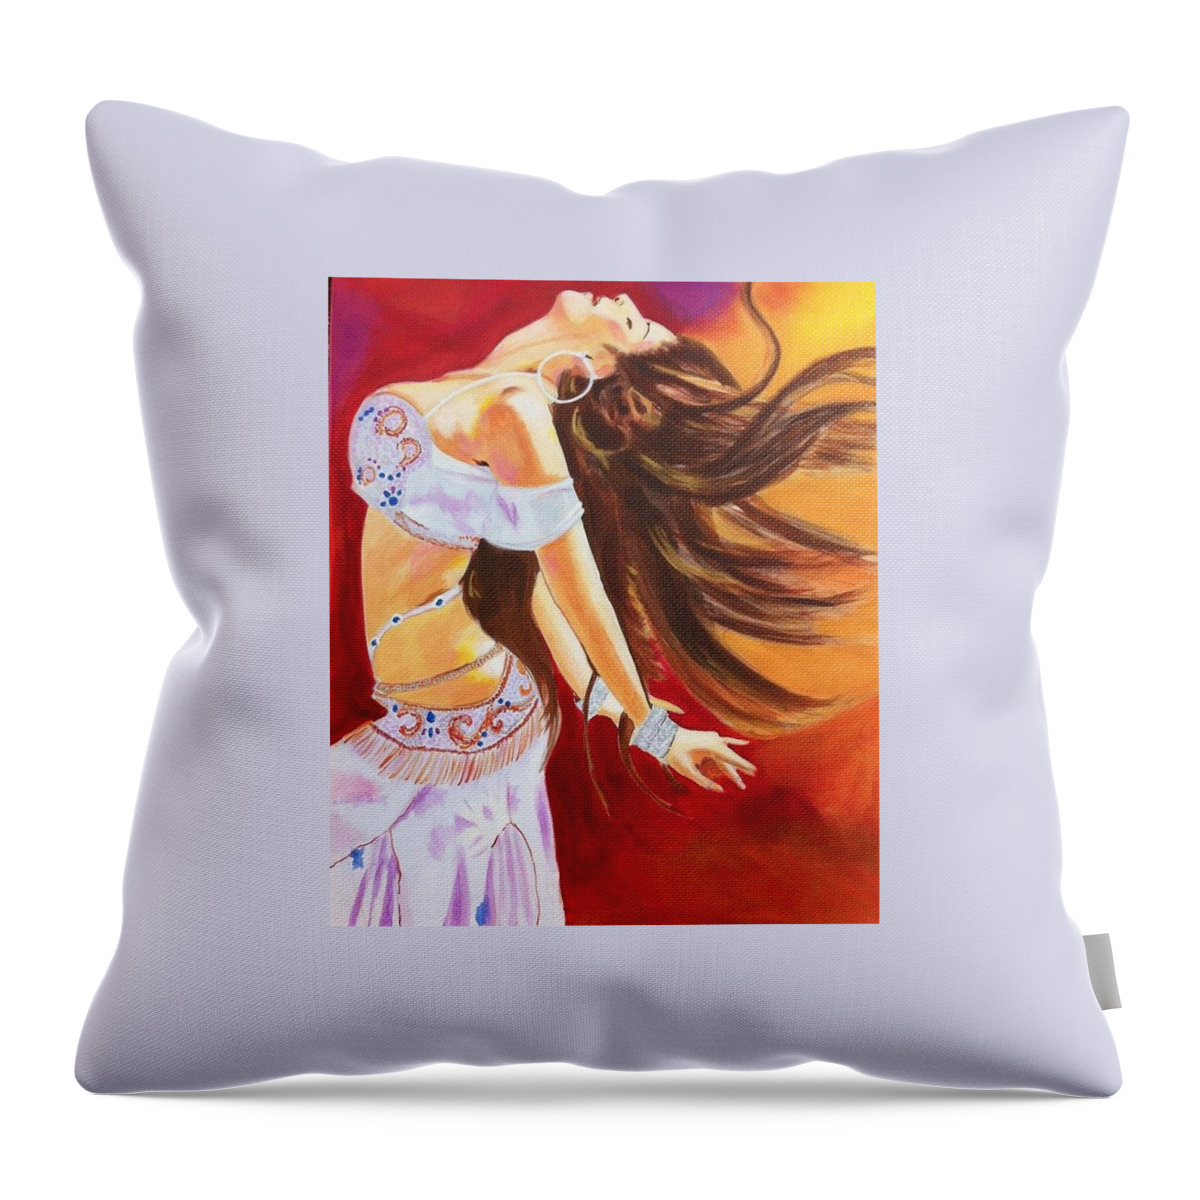 Motivation Throw Pillow featuring the painting Dance to be Free by Yvonne Payne